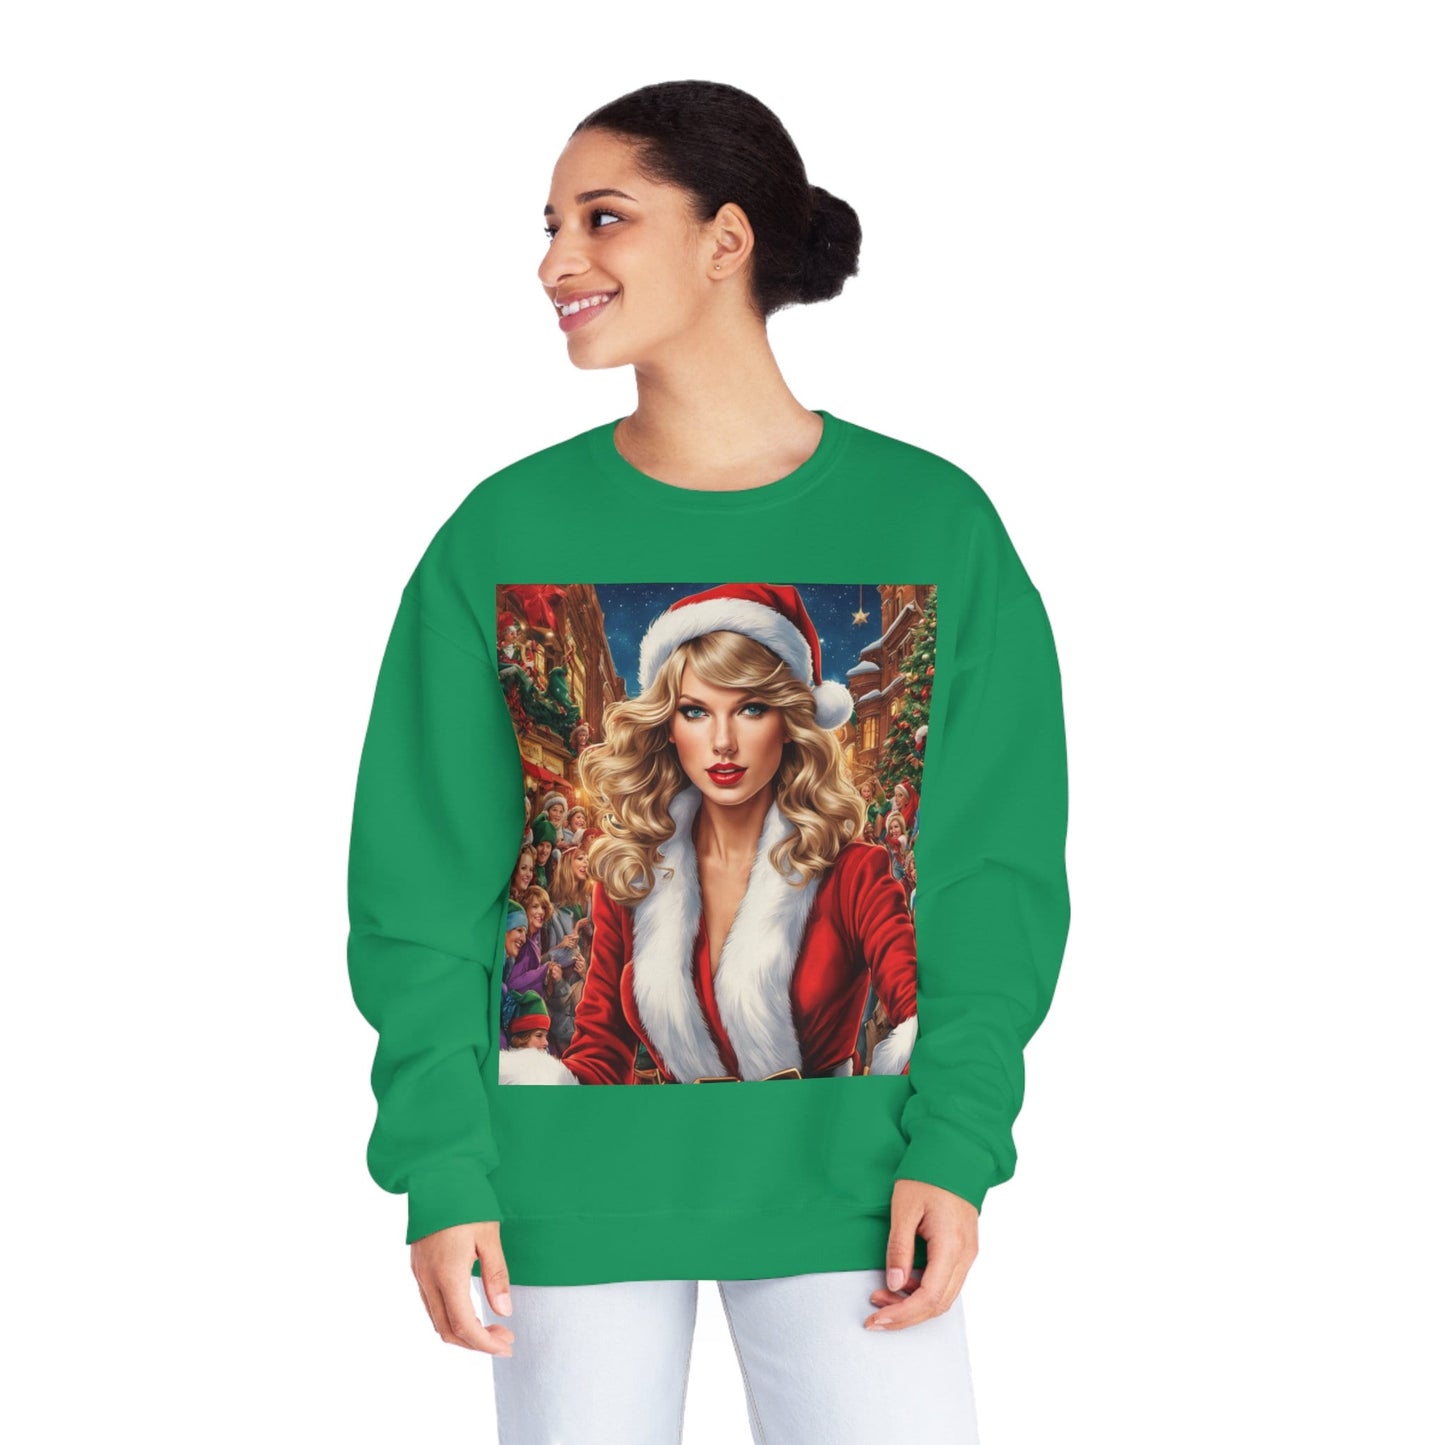 Ugly Swiftmas Sweater Perfect for Christmas Gift for Swiftie Men/Women